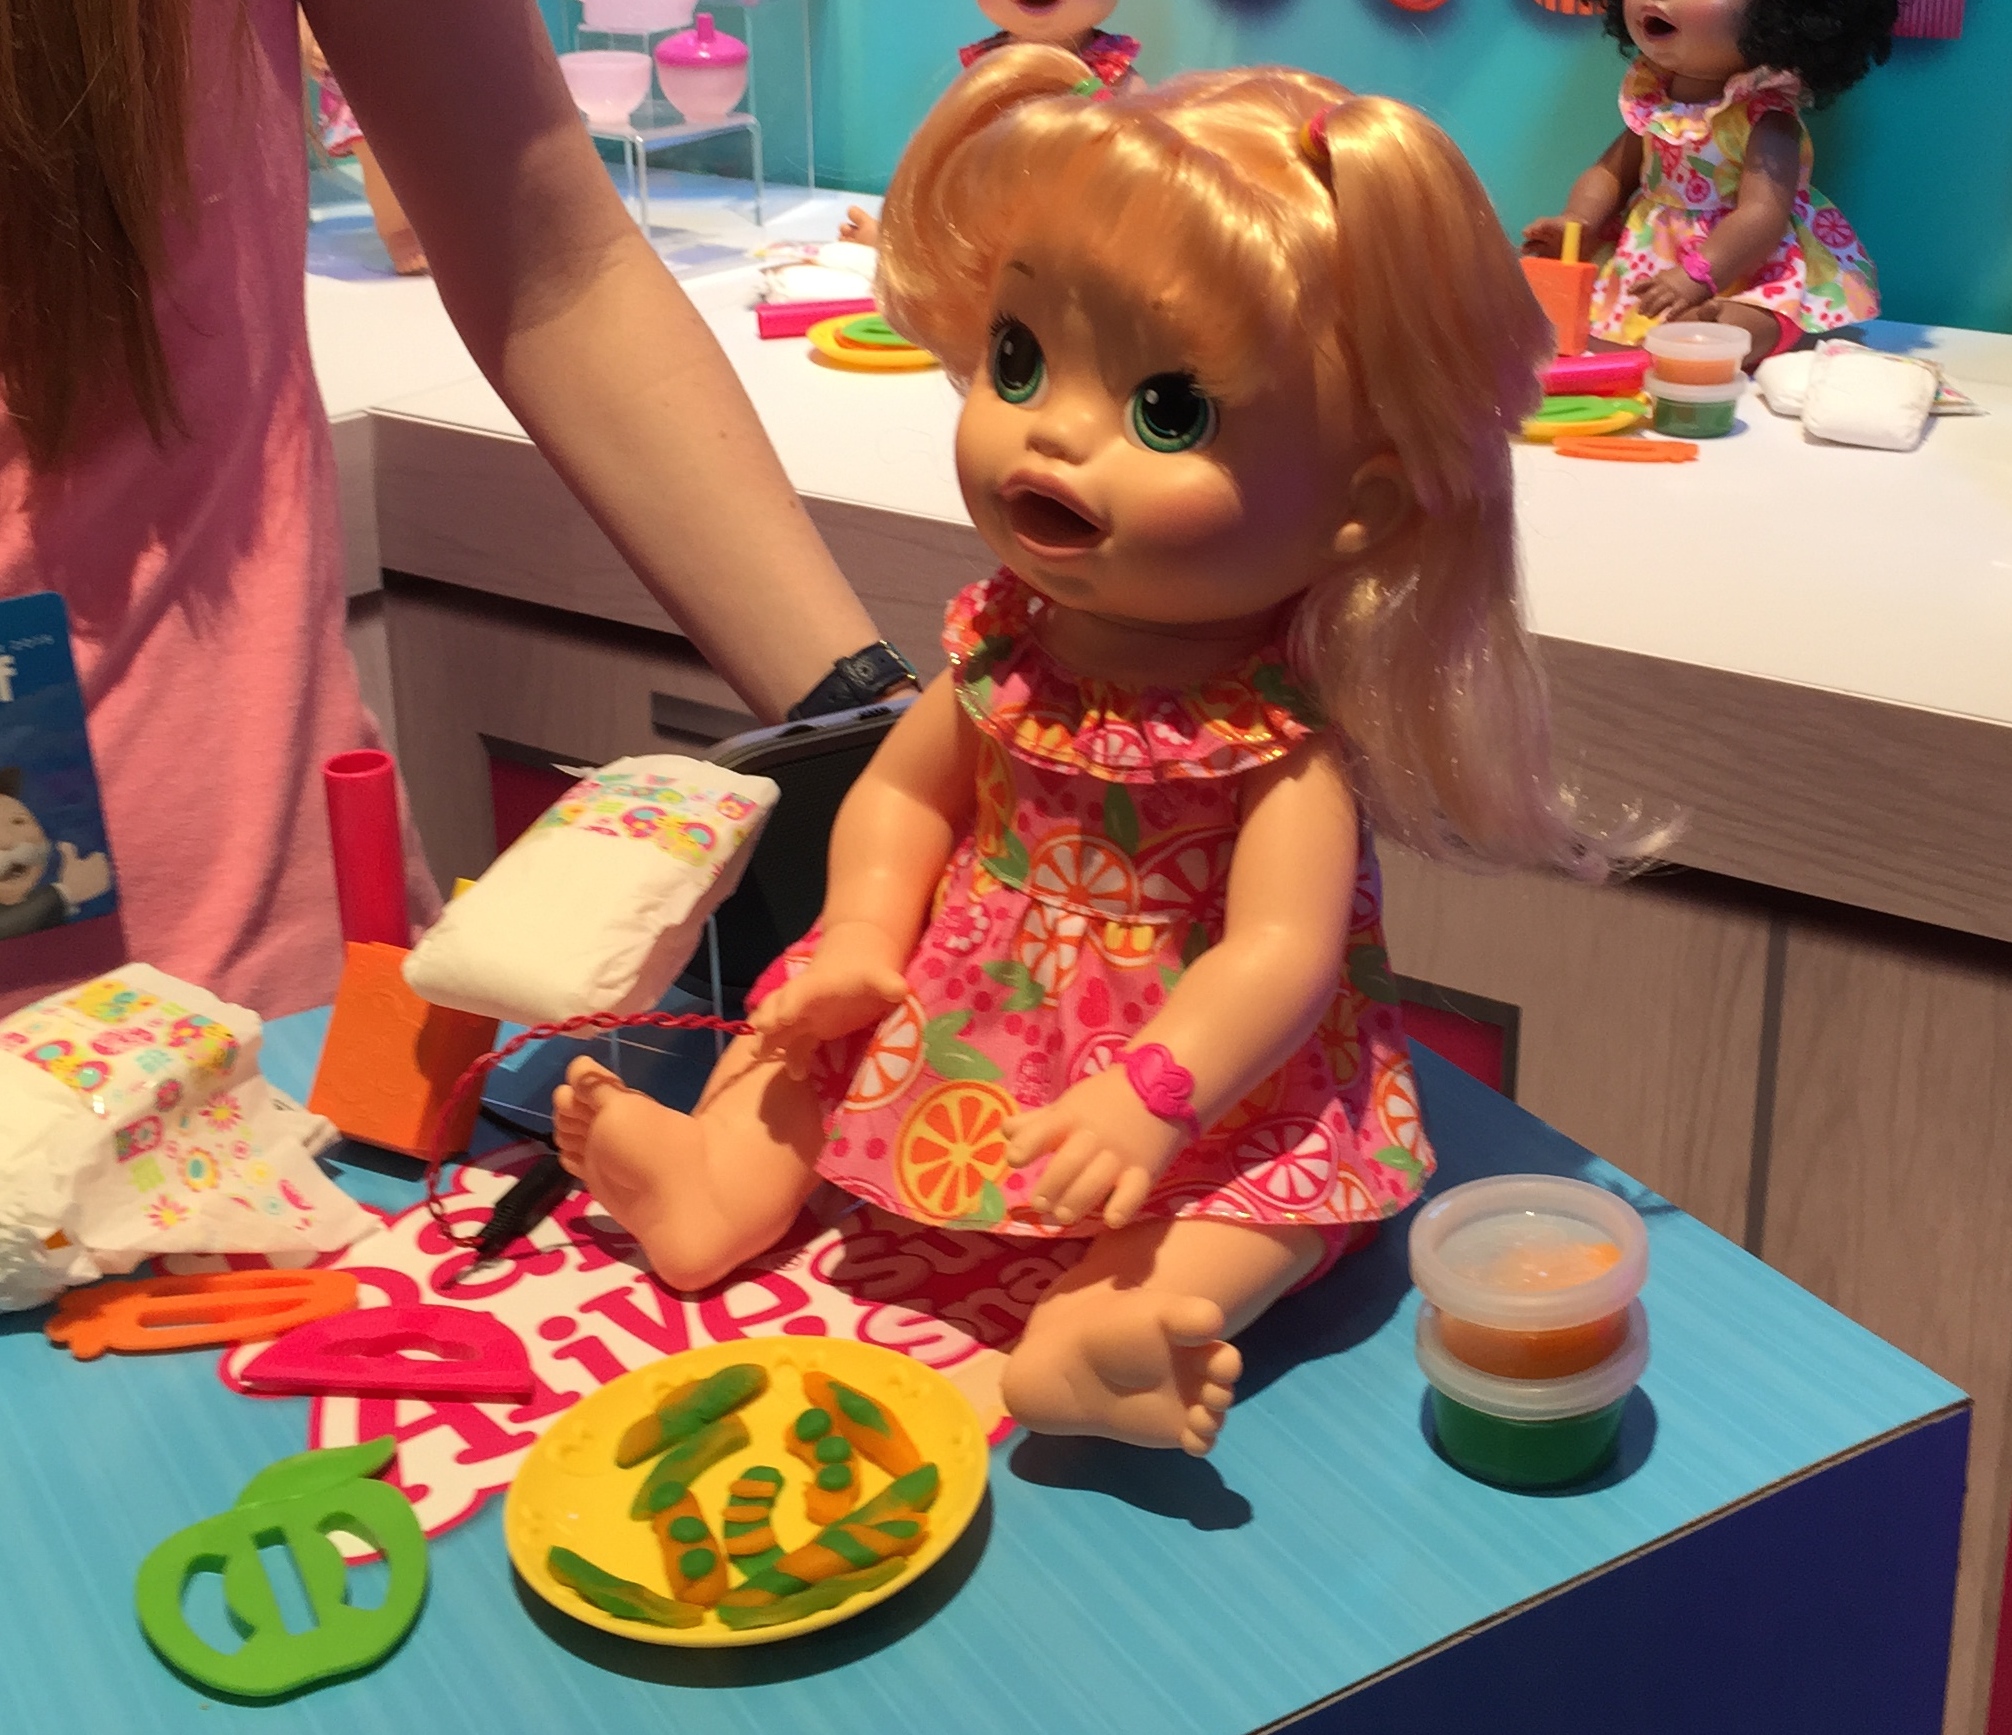 baby alive eats and poops